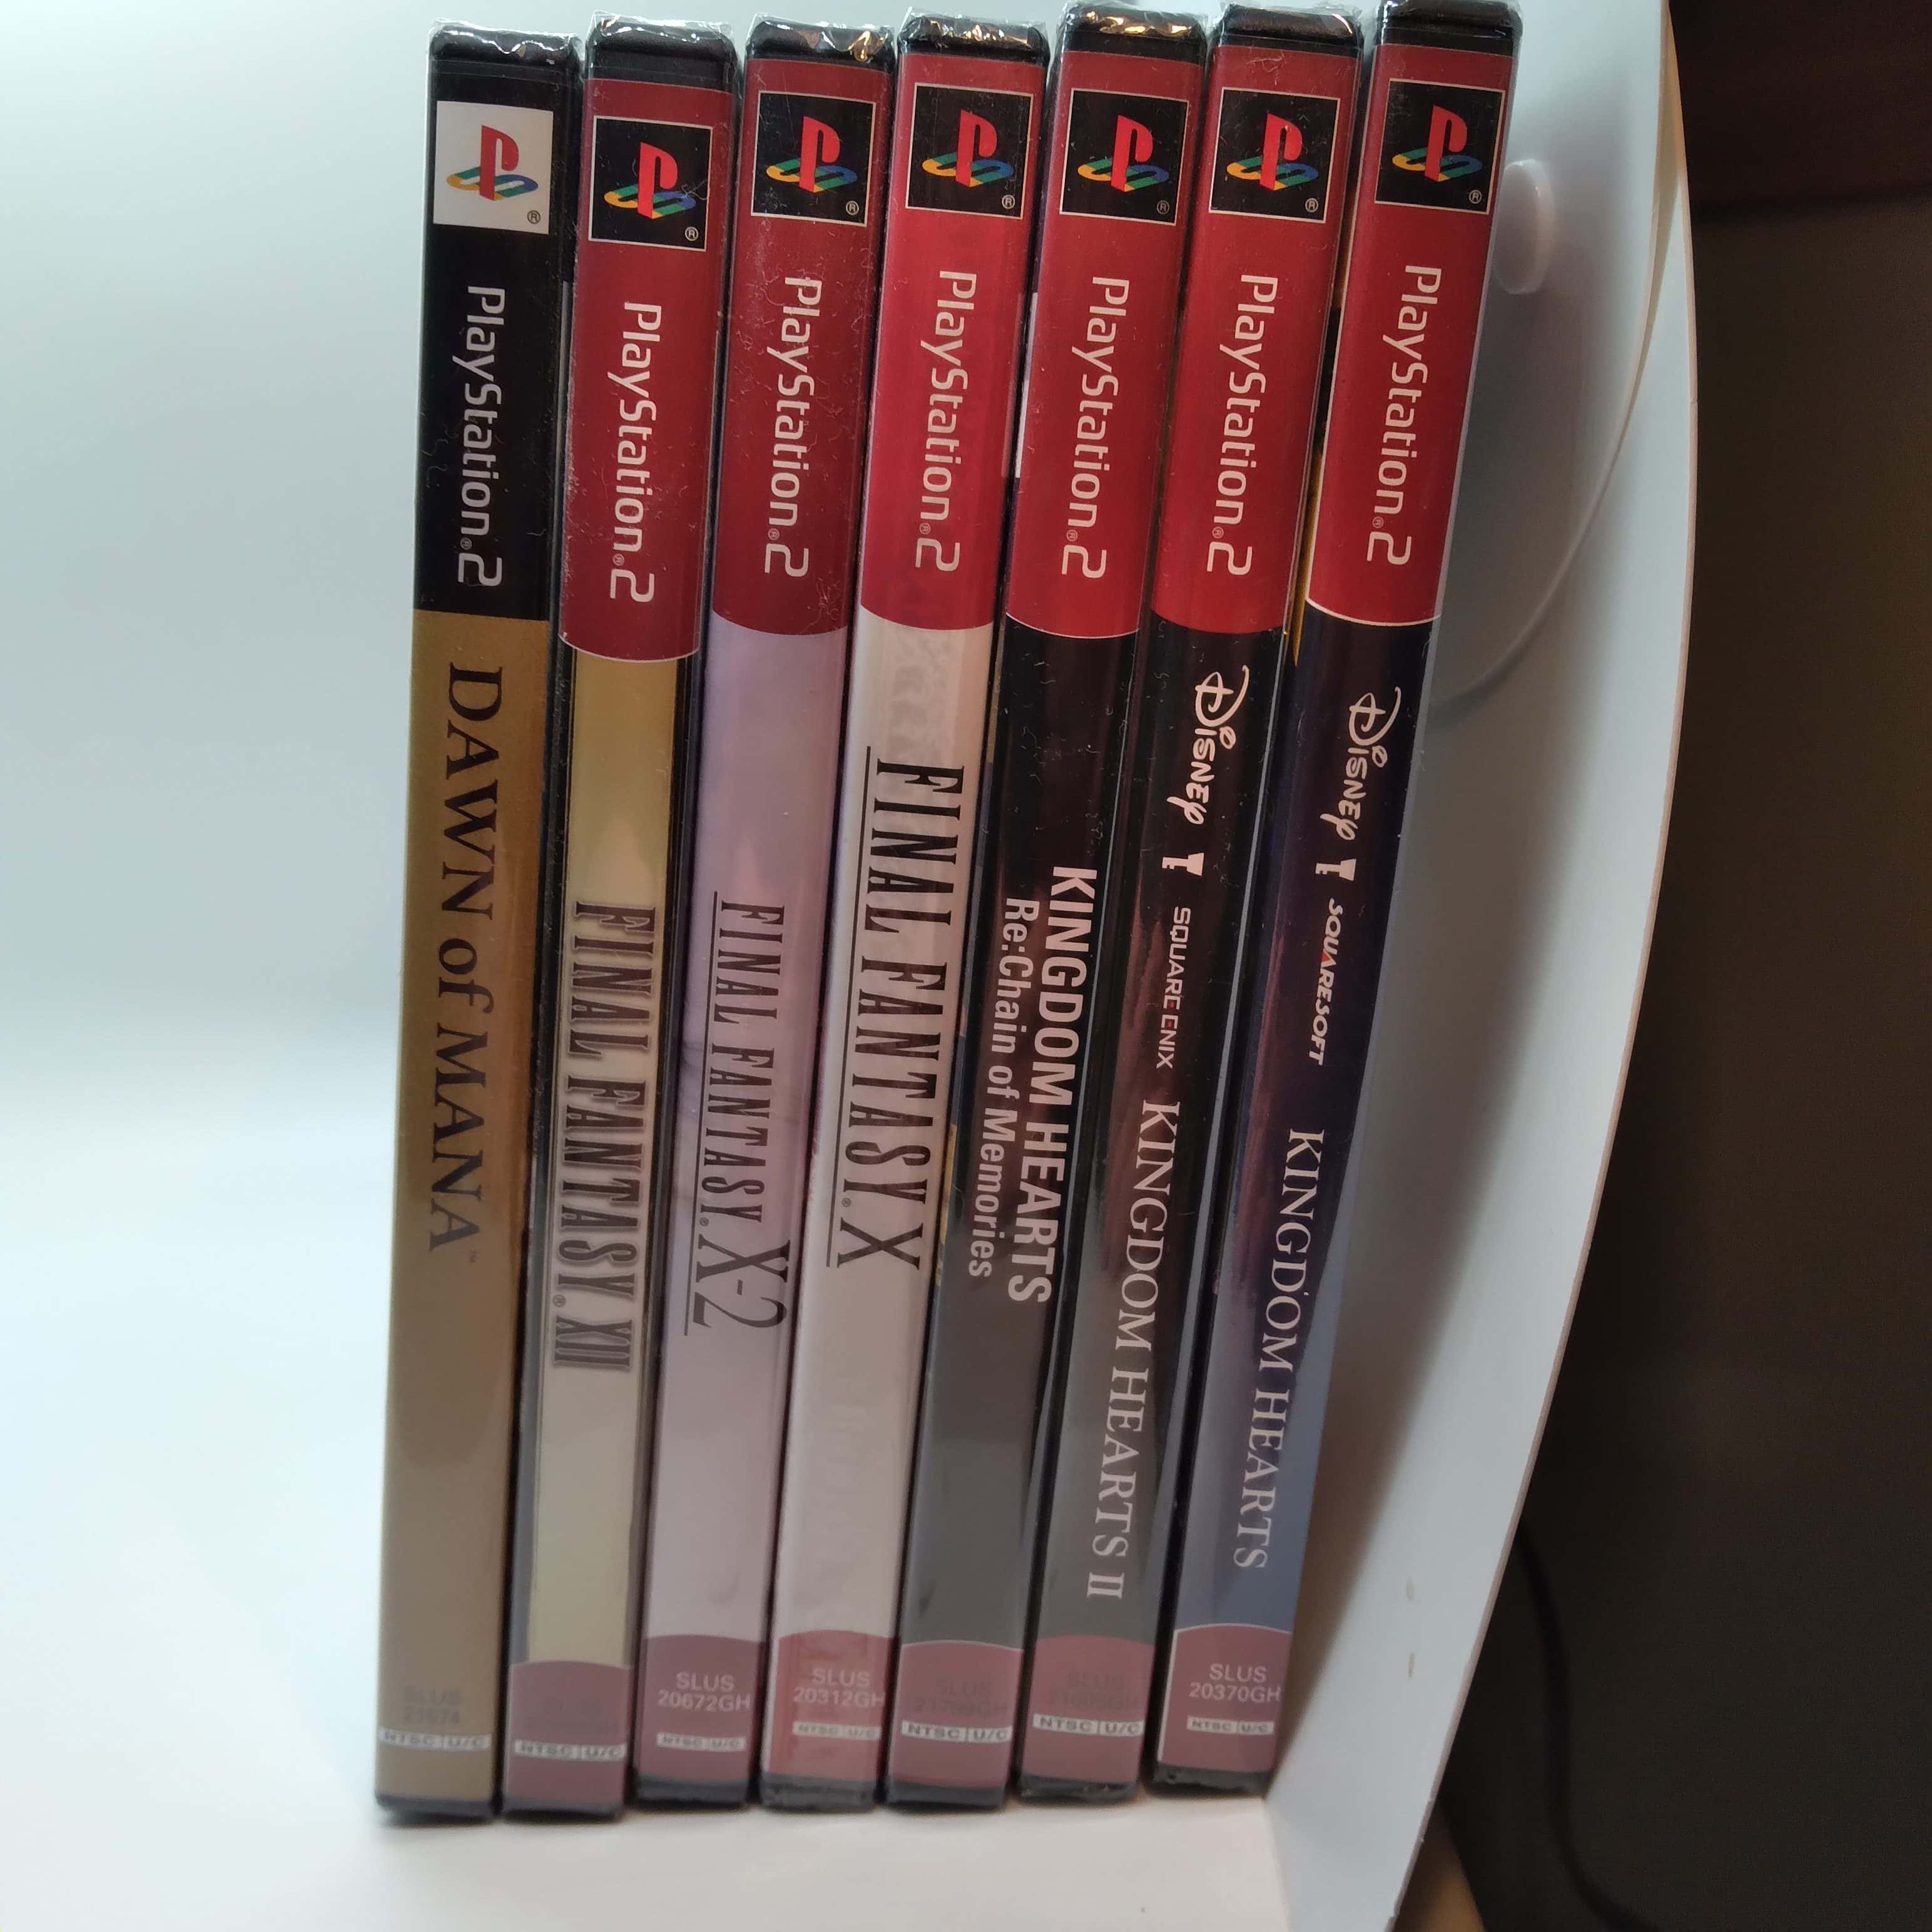 Square Enix Hidden PS1, PS2 and DS Games to Buy New Sealed